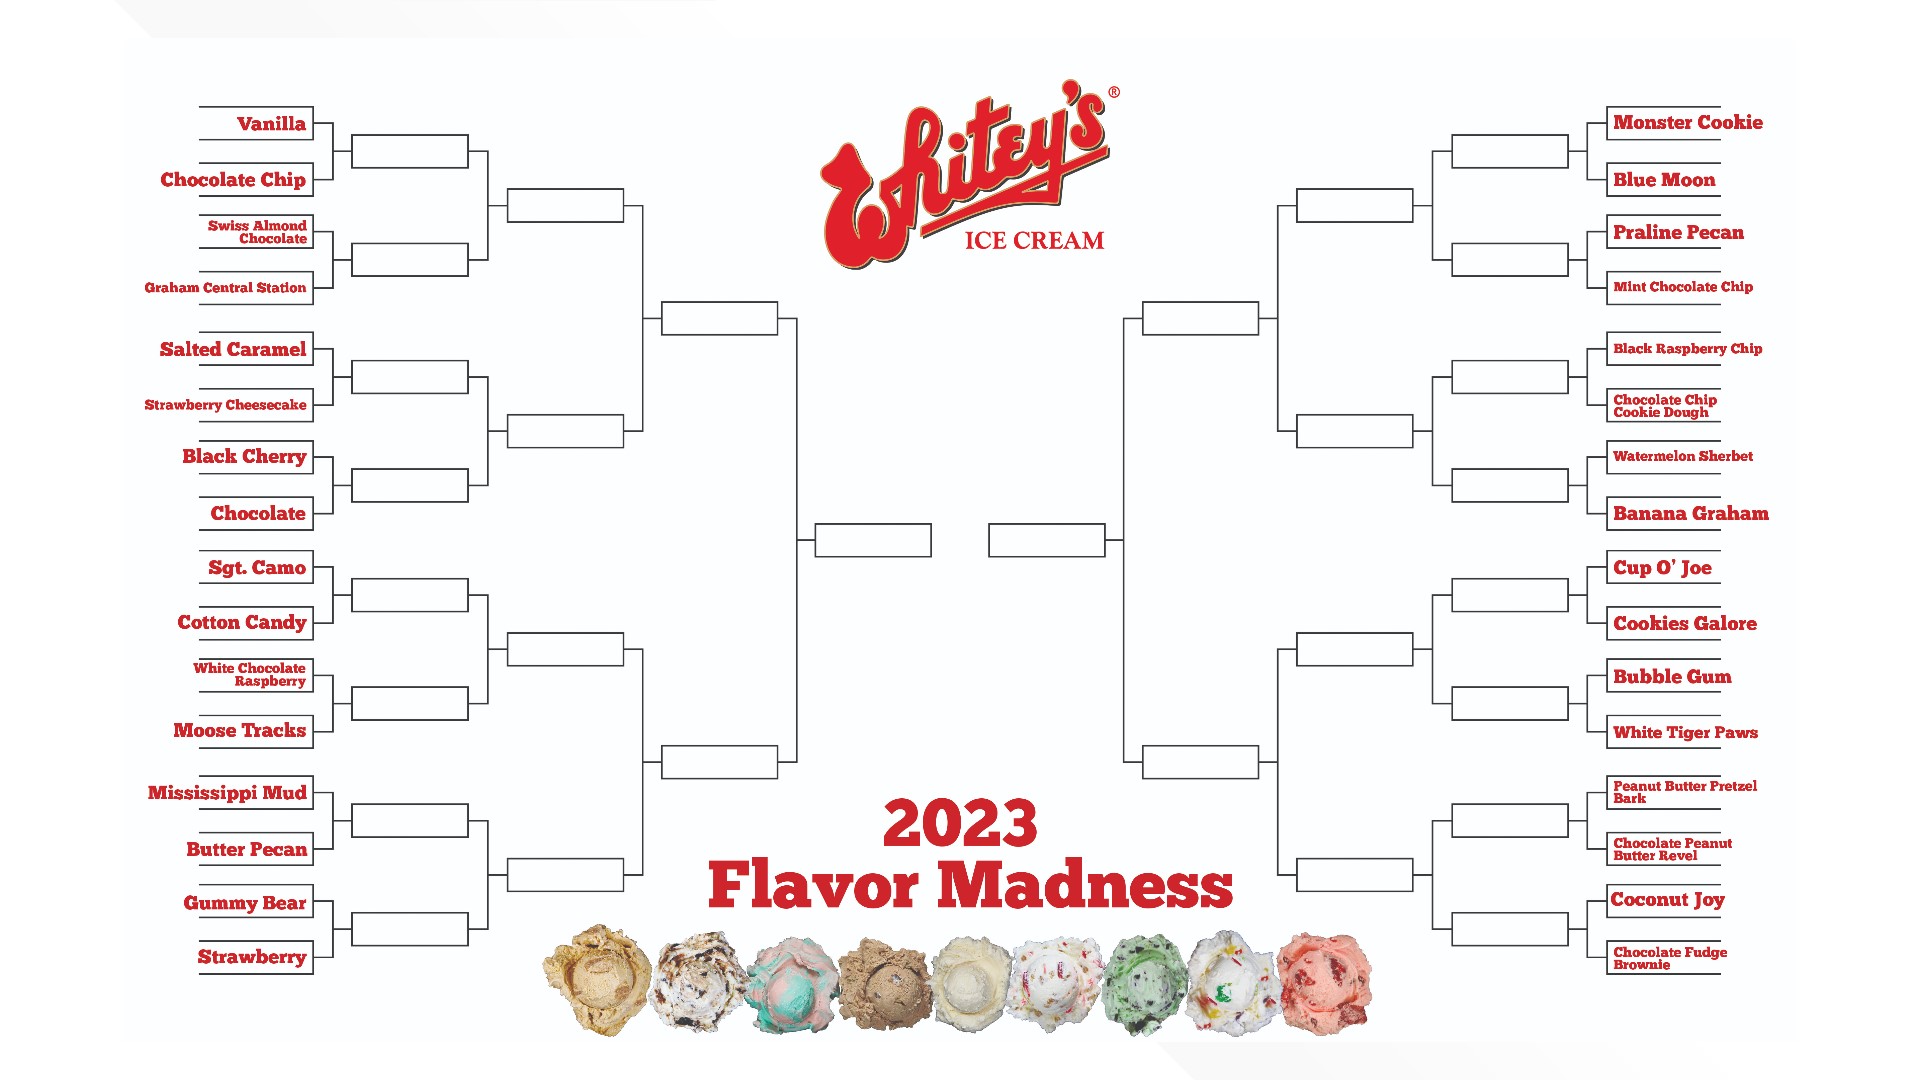 Nearly 30,000 votes were submitted in the 2023 Flavor Madness bracket.